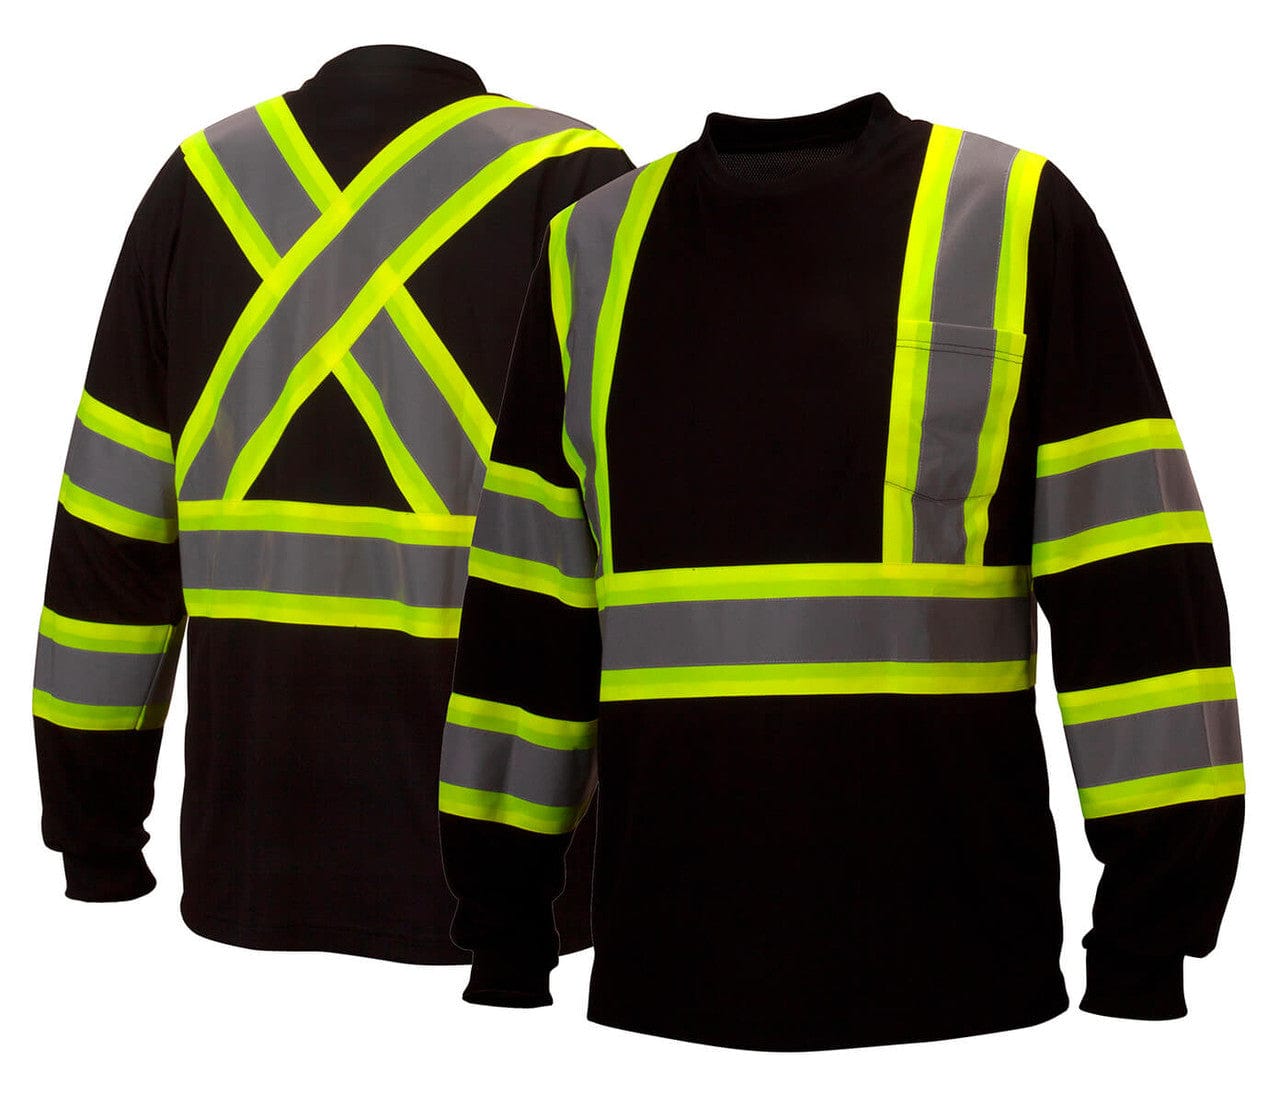 Pyramex RCLTS31 Type 0 Class 1 Black Hi-Vis Long Sleeve Safety T-Shirt - Front and Back